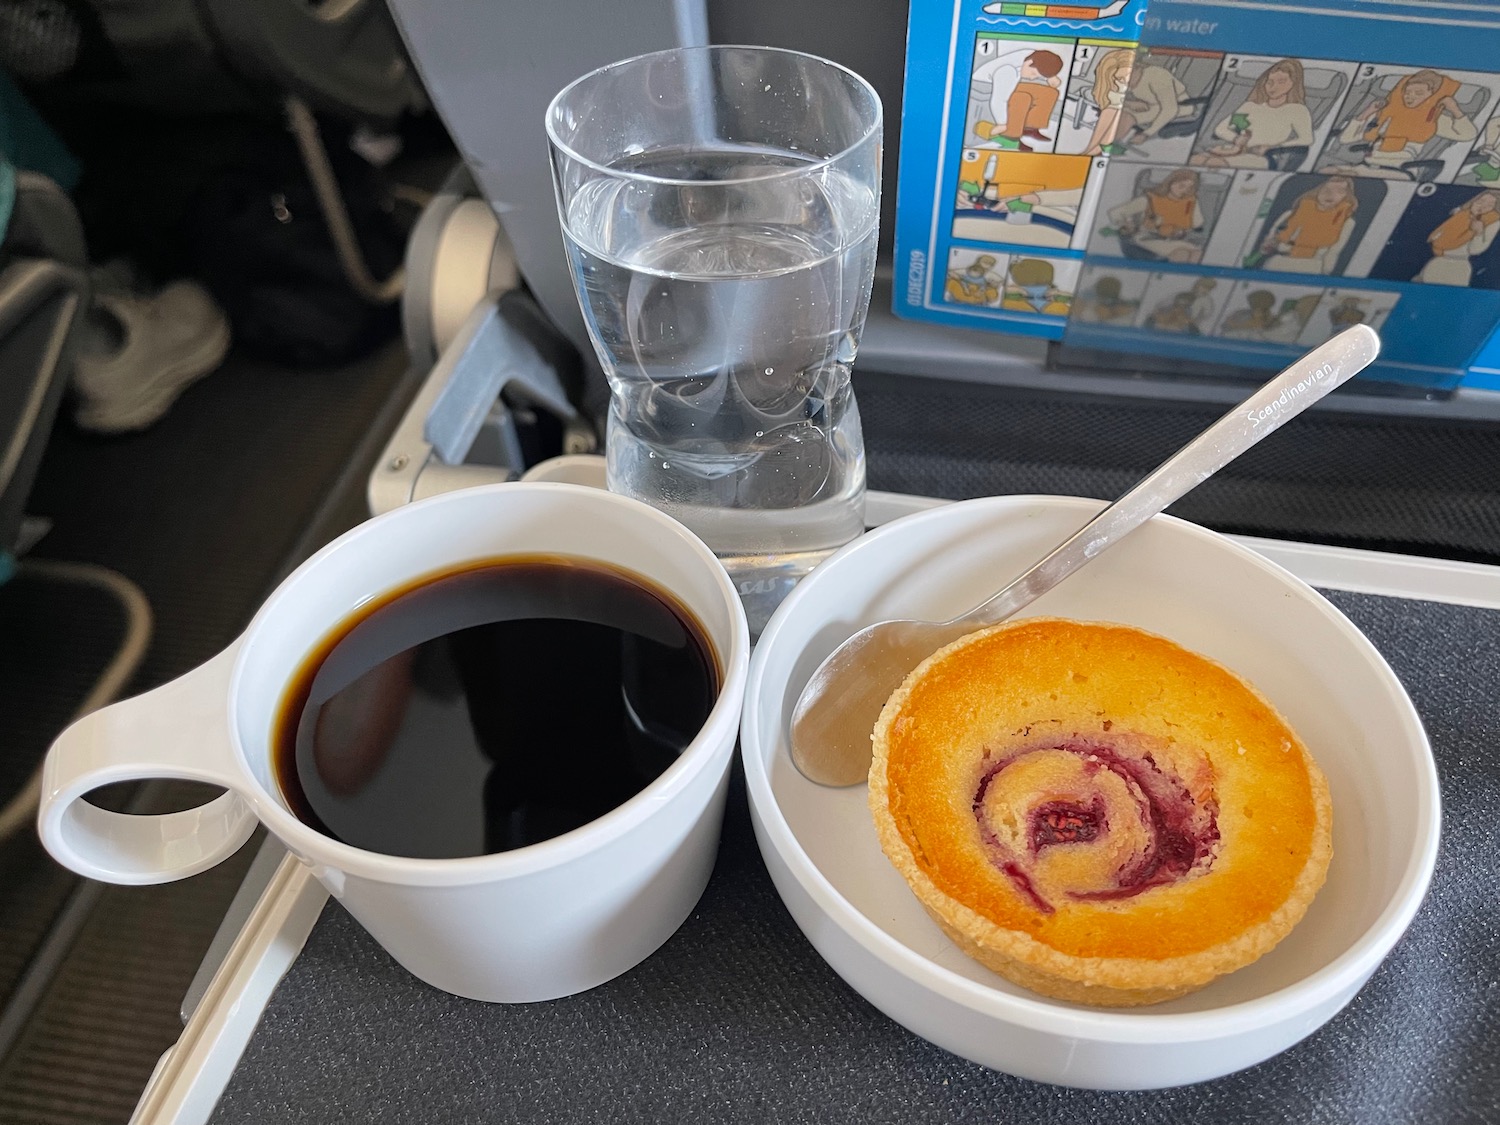 a cup of coffee and a pastry on a tray